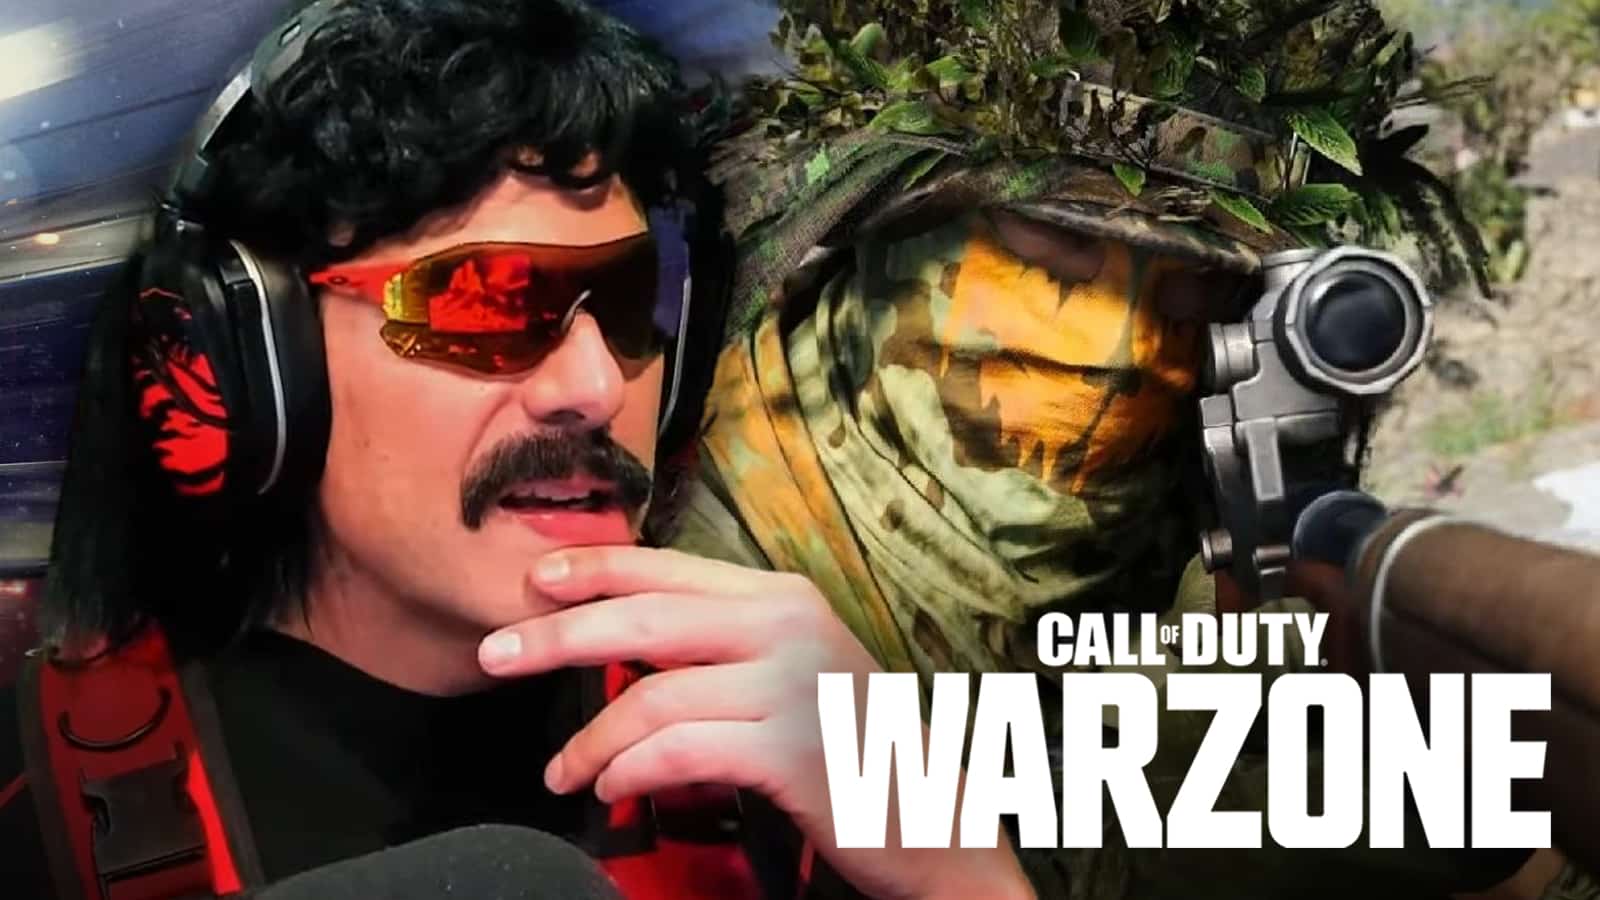 Dr Disrespect confused about Warzone character.